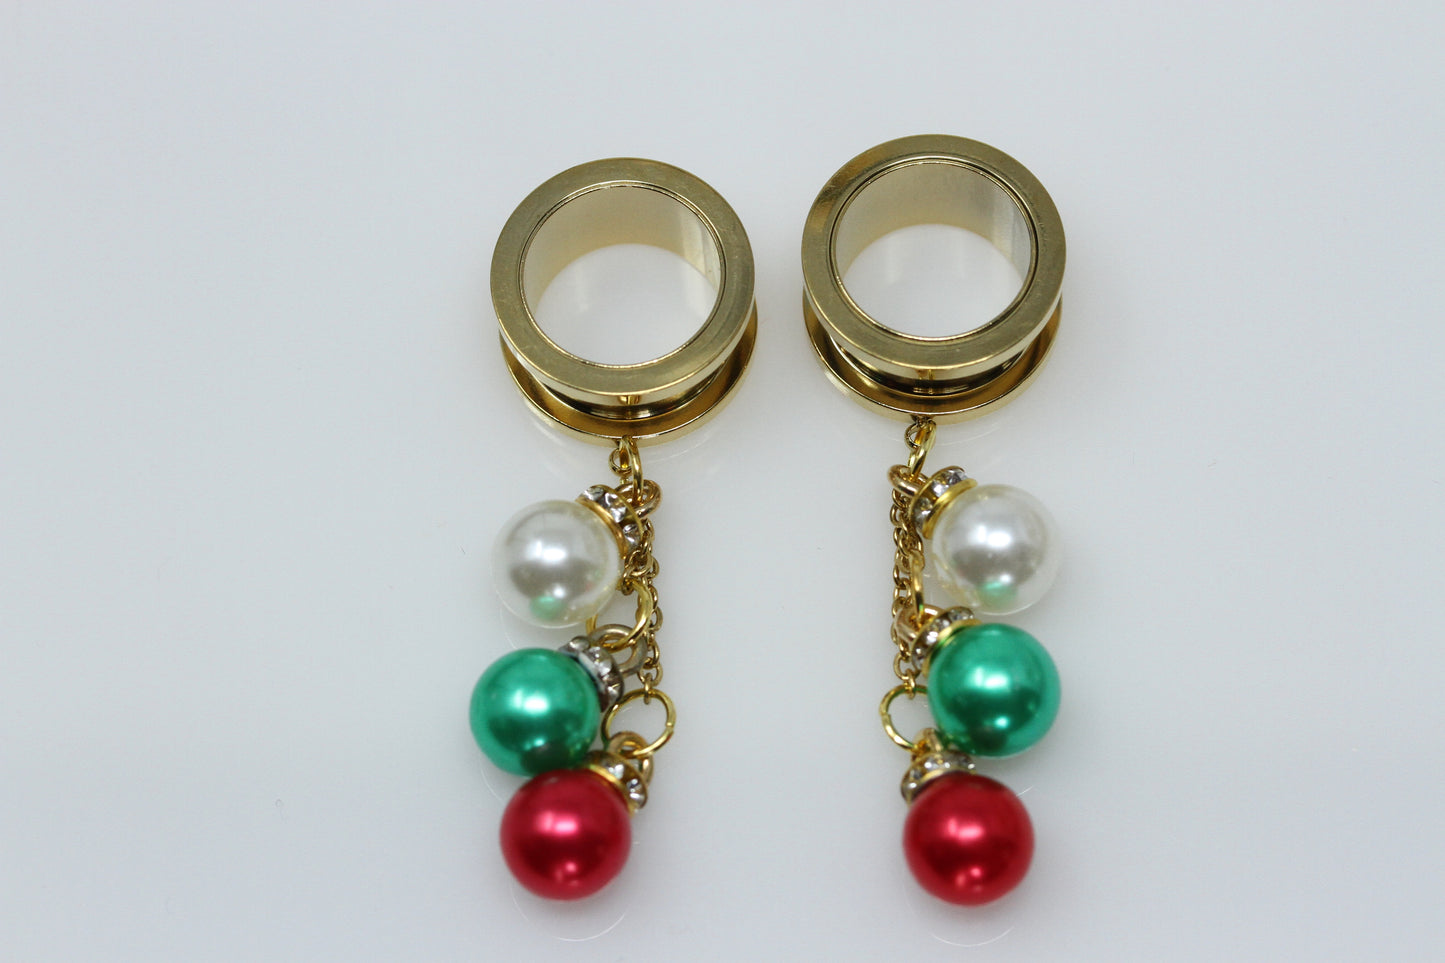 Christmas Ornament Danglers - Screw on Tunnel (Pair) - TF038